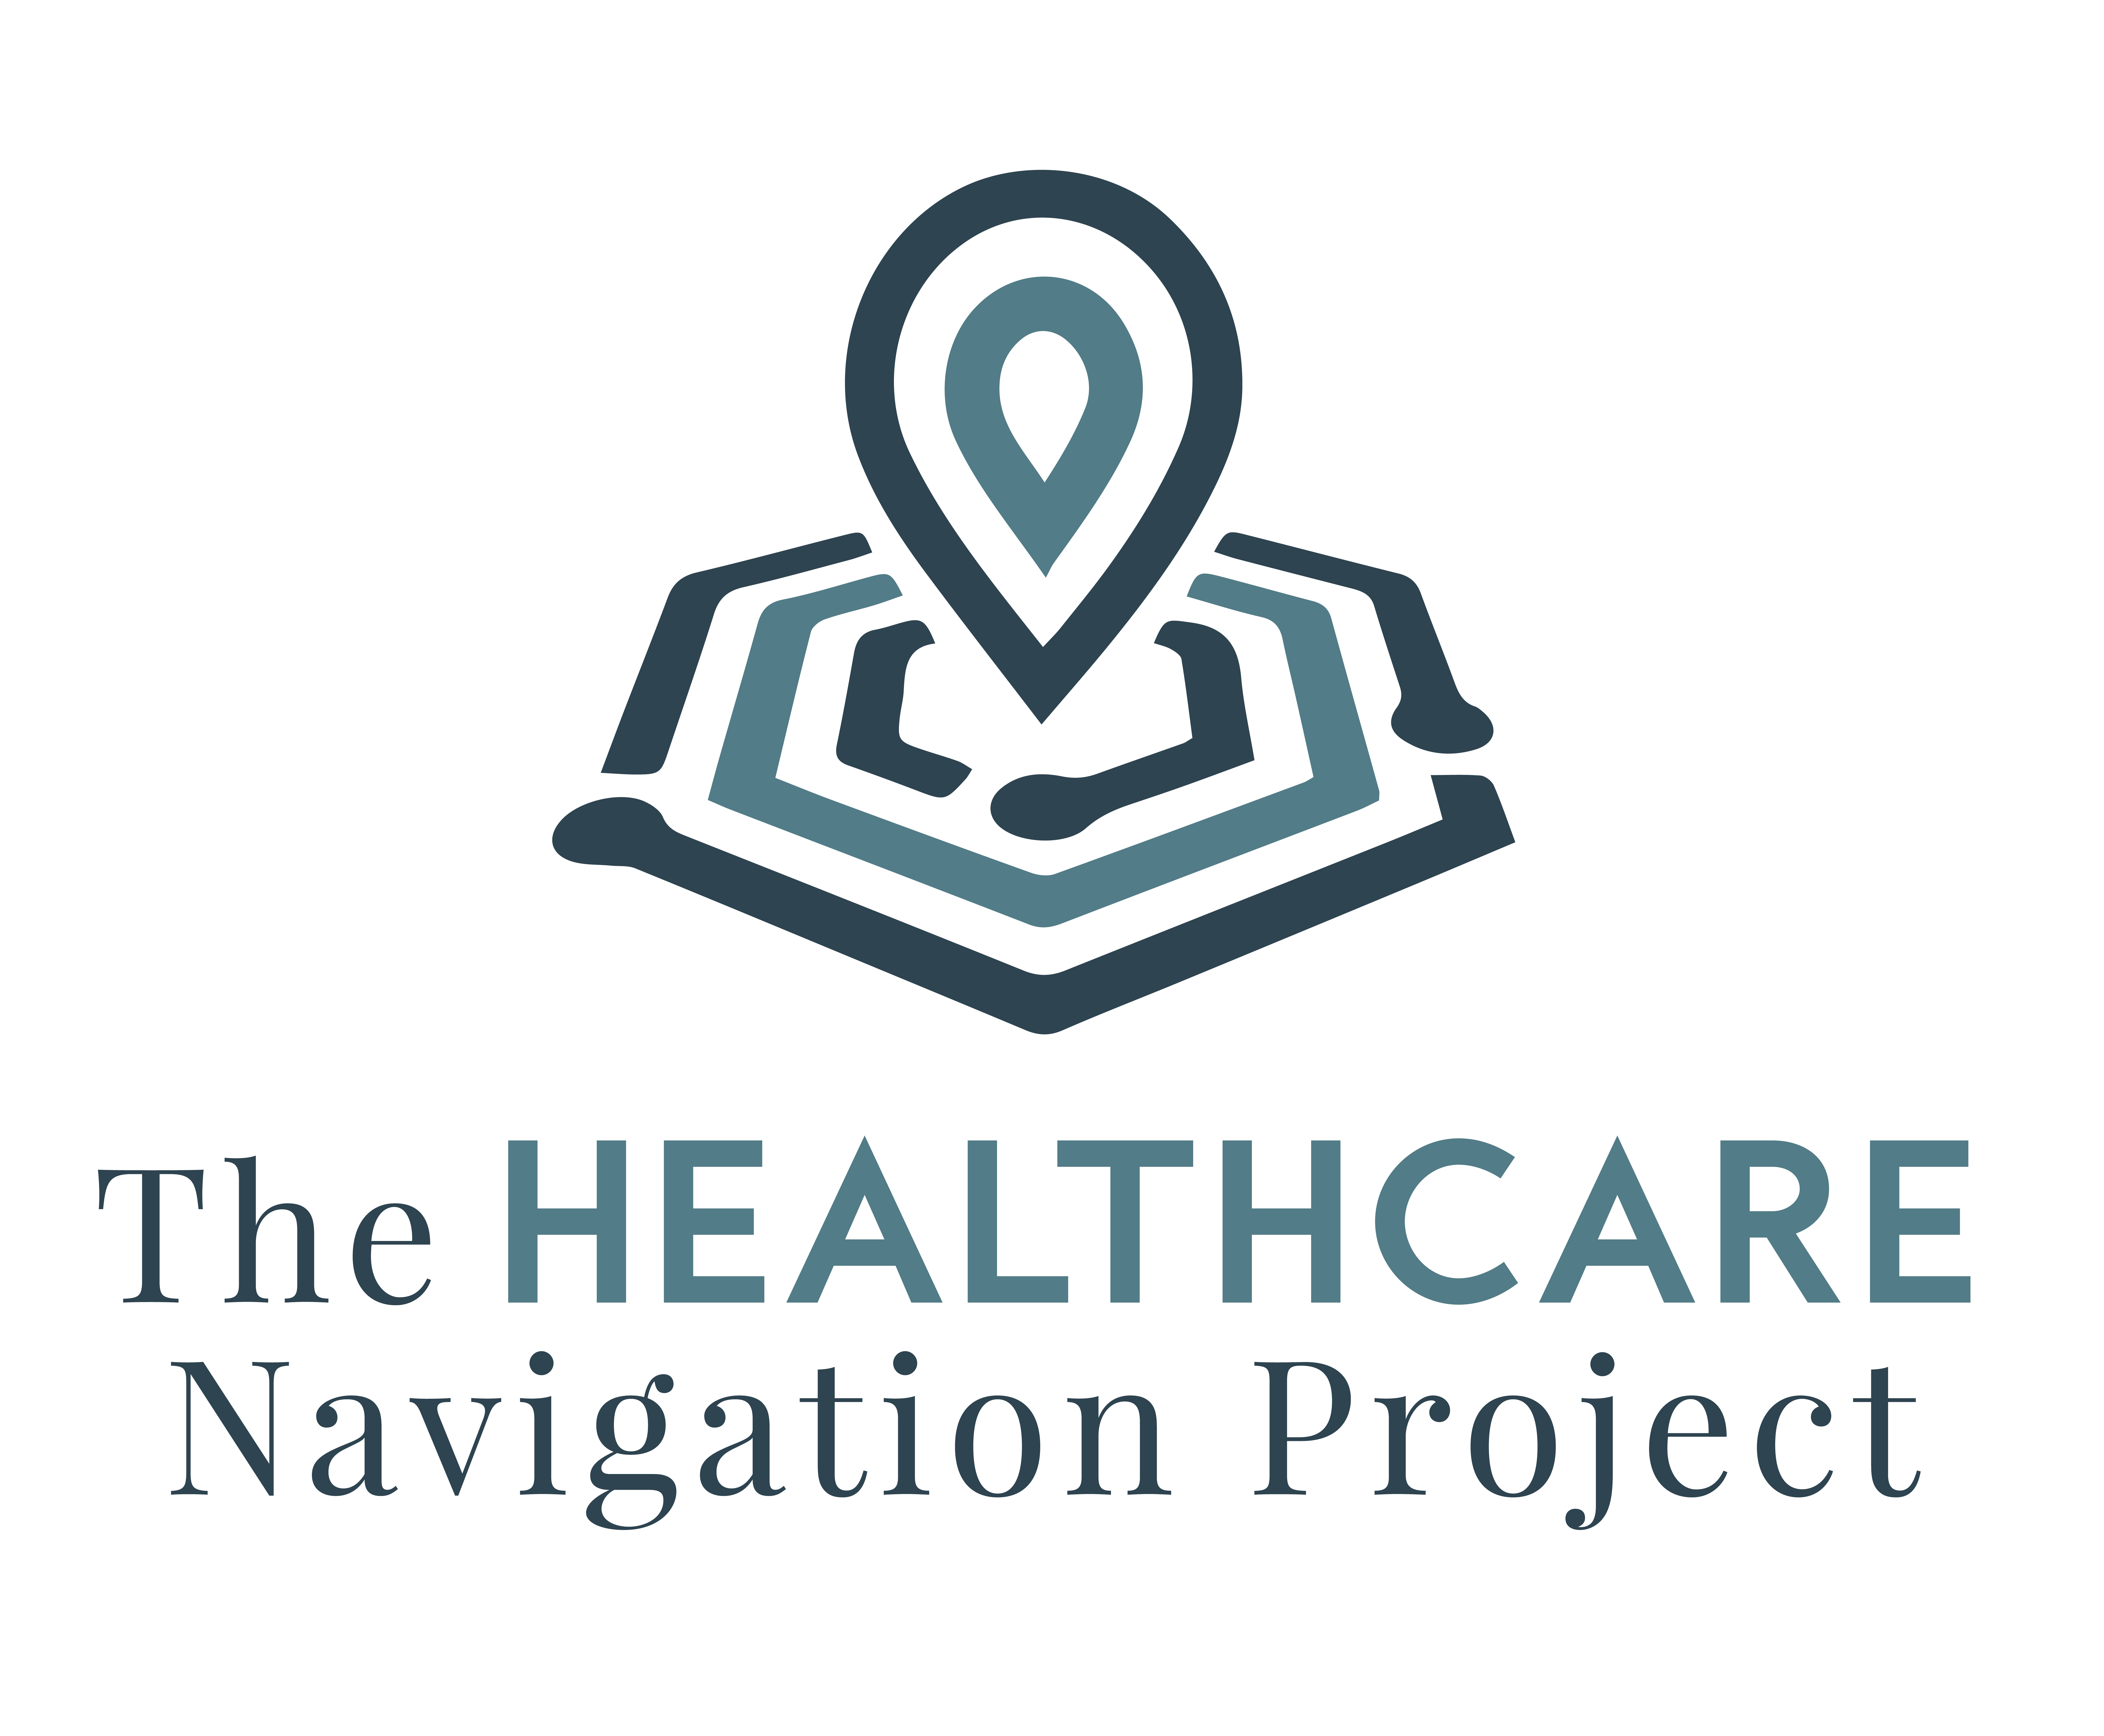 The Healthcare Navigation Project